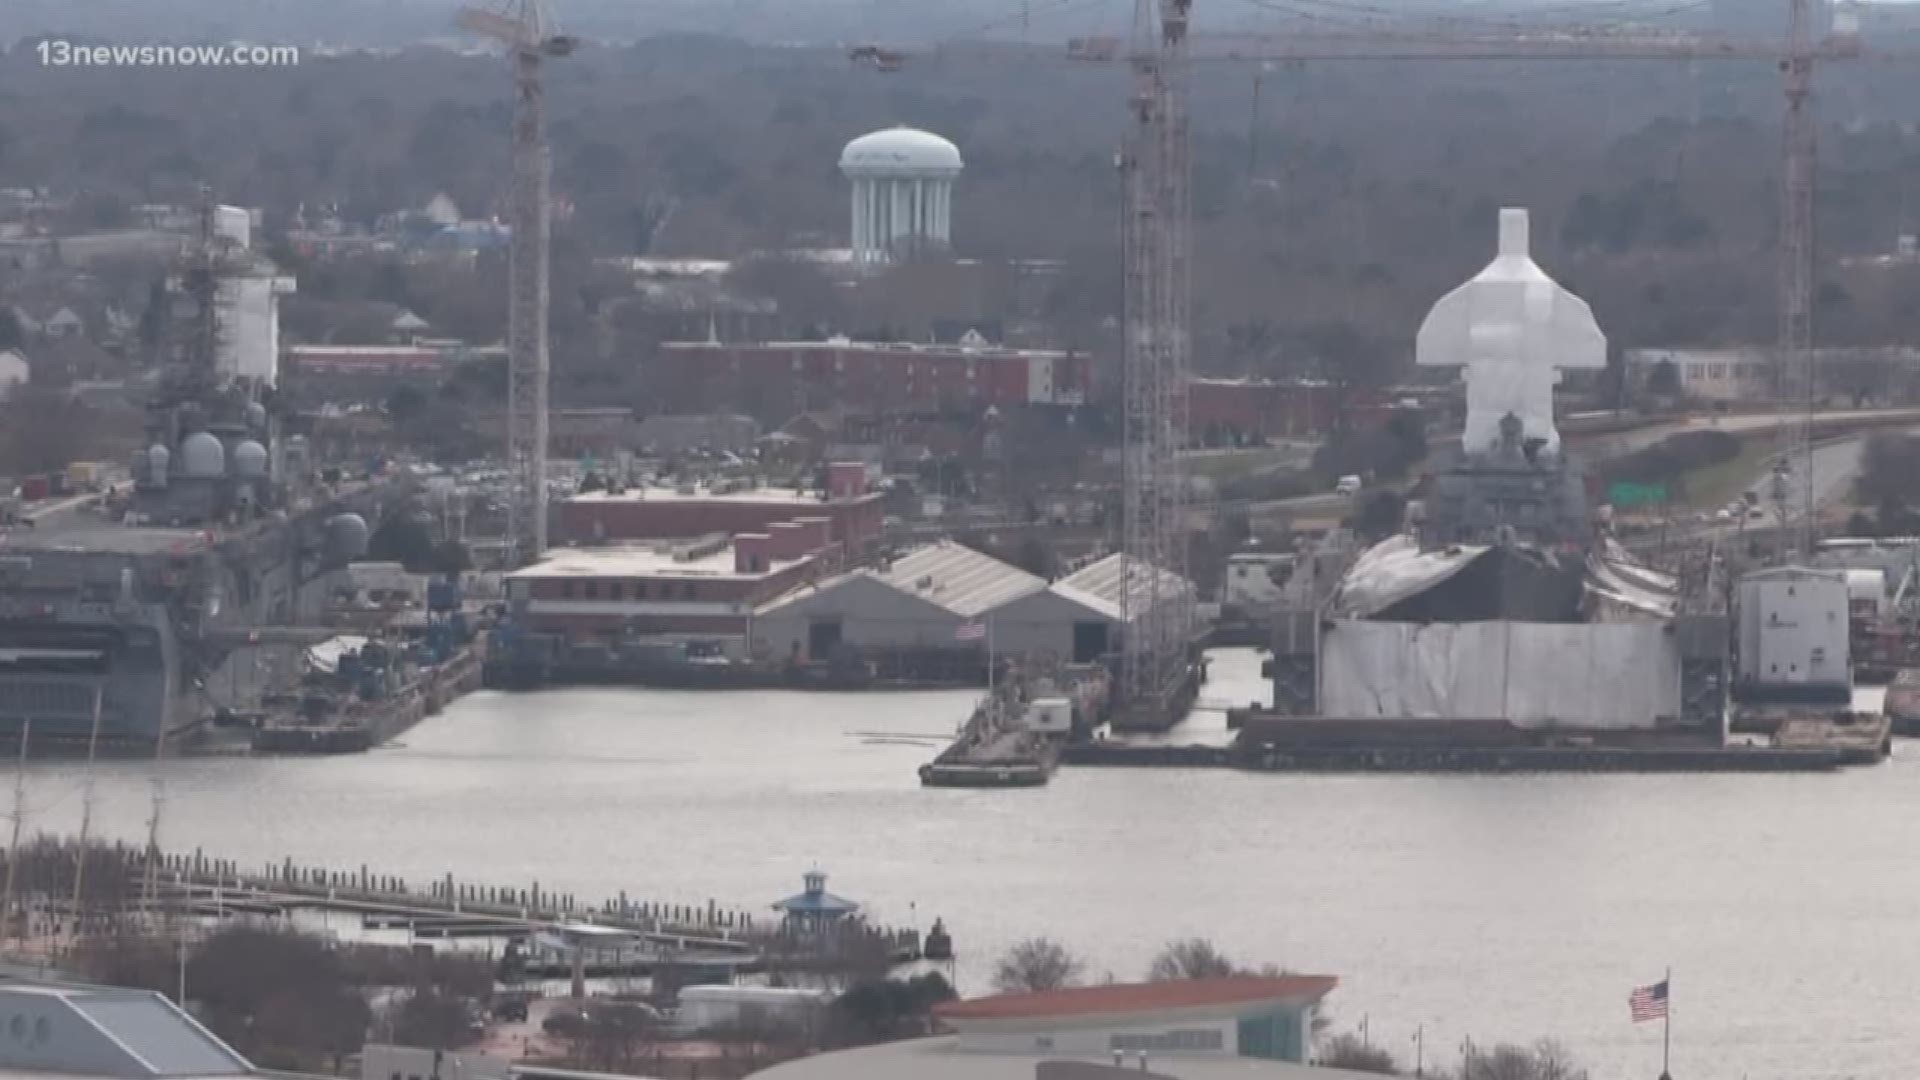 Officials gave the all-clear after a shooter was reported at Norfolk Naval Shipyard. A source told 13News Now that it was a false alarm.